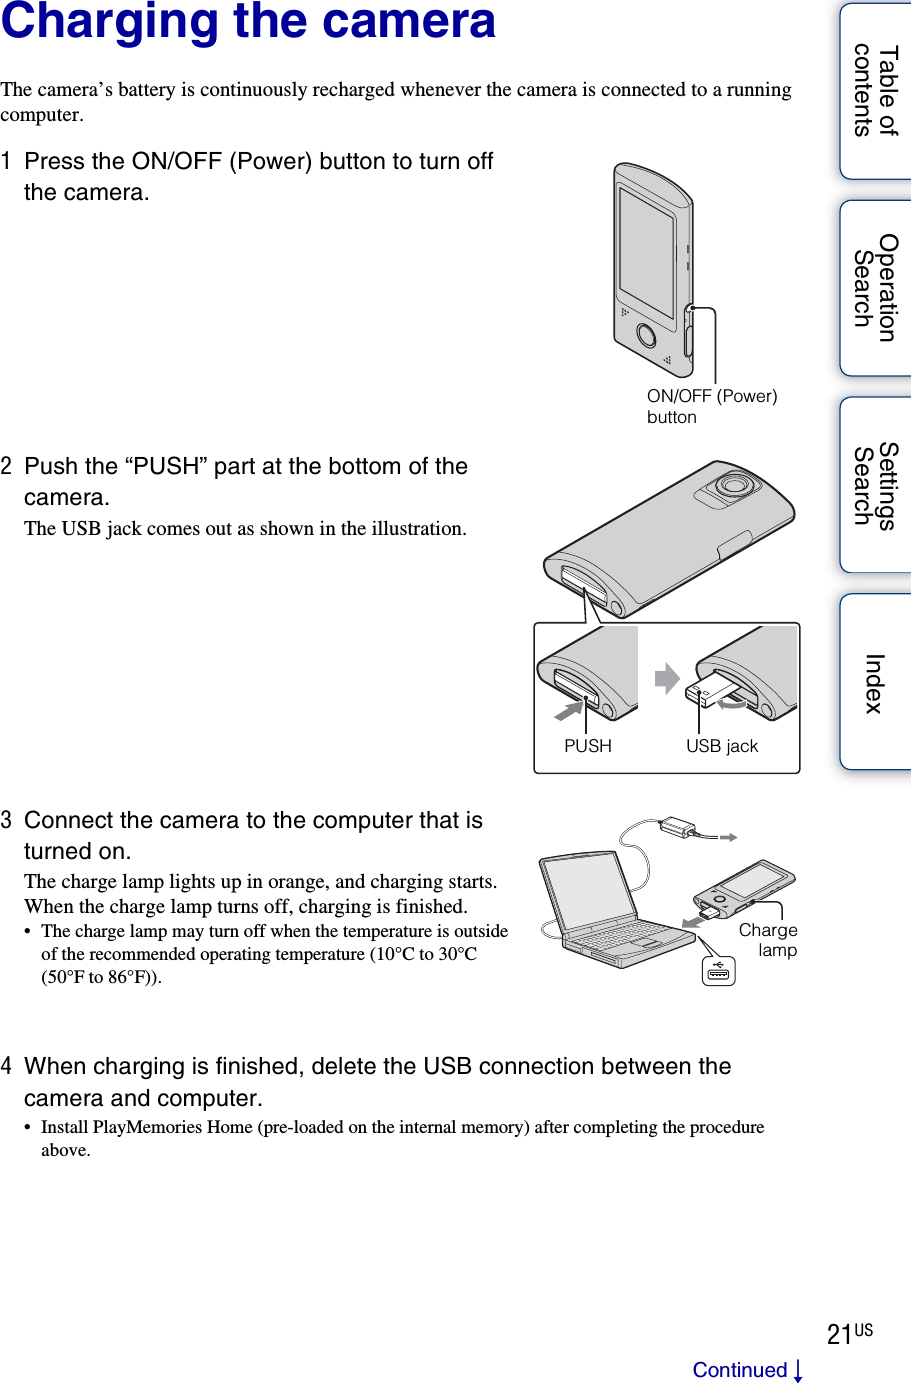 21USTable of contentsOperation SearchSettings Search IndexCharging the cameraThe camera’s battery is continuously recharged whenever the camera is connected to a running computer.1Press the ON/OFF (Power) button to turn off the camera.2Push the “PUSH” part at the bottom of the camera.The USB jack comes out as shown in the illustration.3Connect the camera to the computer that is turned on.The charge lamp lights up in orange, and charging starts.When the charge lamp turns off, charging is finished.• The charge lamp may turn off when the temperature is outside of the recommended operating temperature (10°C to 30°C (50°F to 86°F)).4When charging is finished, delete the USB connection between the camera and computer.• Install PlayMemories Home (pre-loaded on the internal memory) after completing the procedure above.ON/OFF (Power) buttonUSB jackPUSHChargelampContinued r